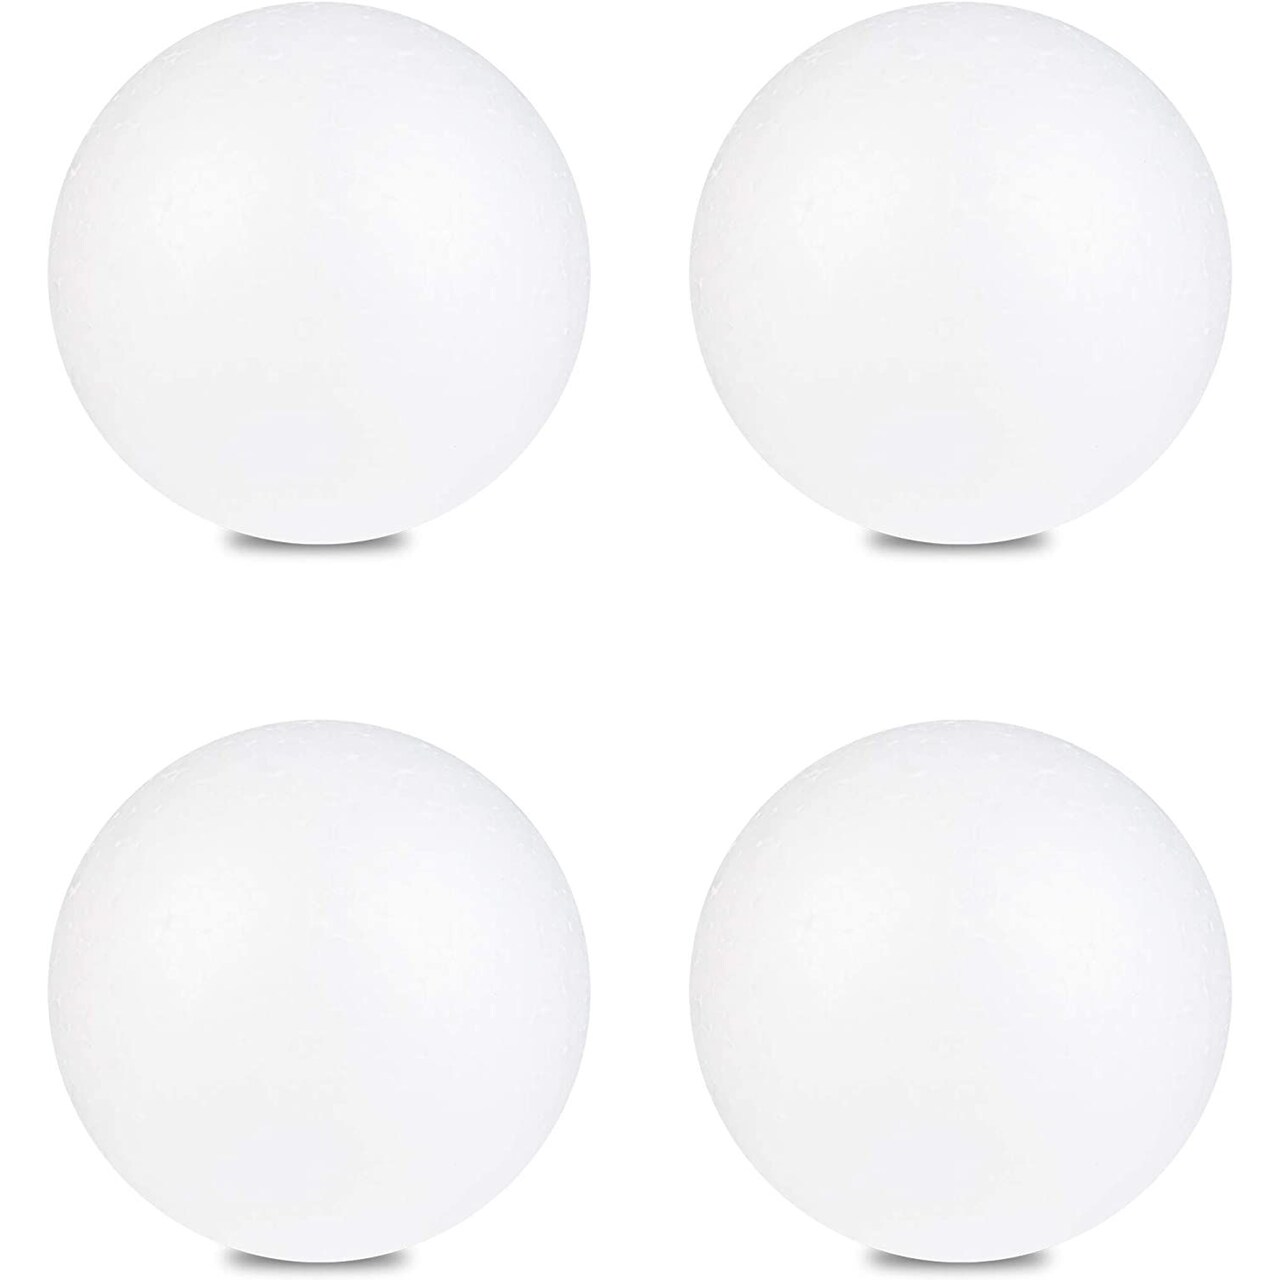 5 Inch Foam Balls for Crafts - 4 Pack Solid Round White Polystyrene Spheres  for Ornaments, DIY Projects, Craft Modeling